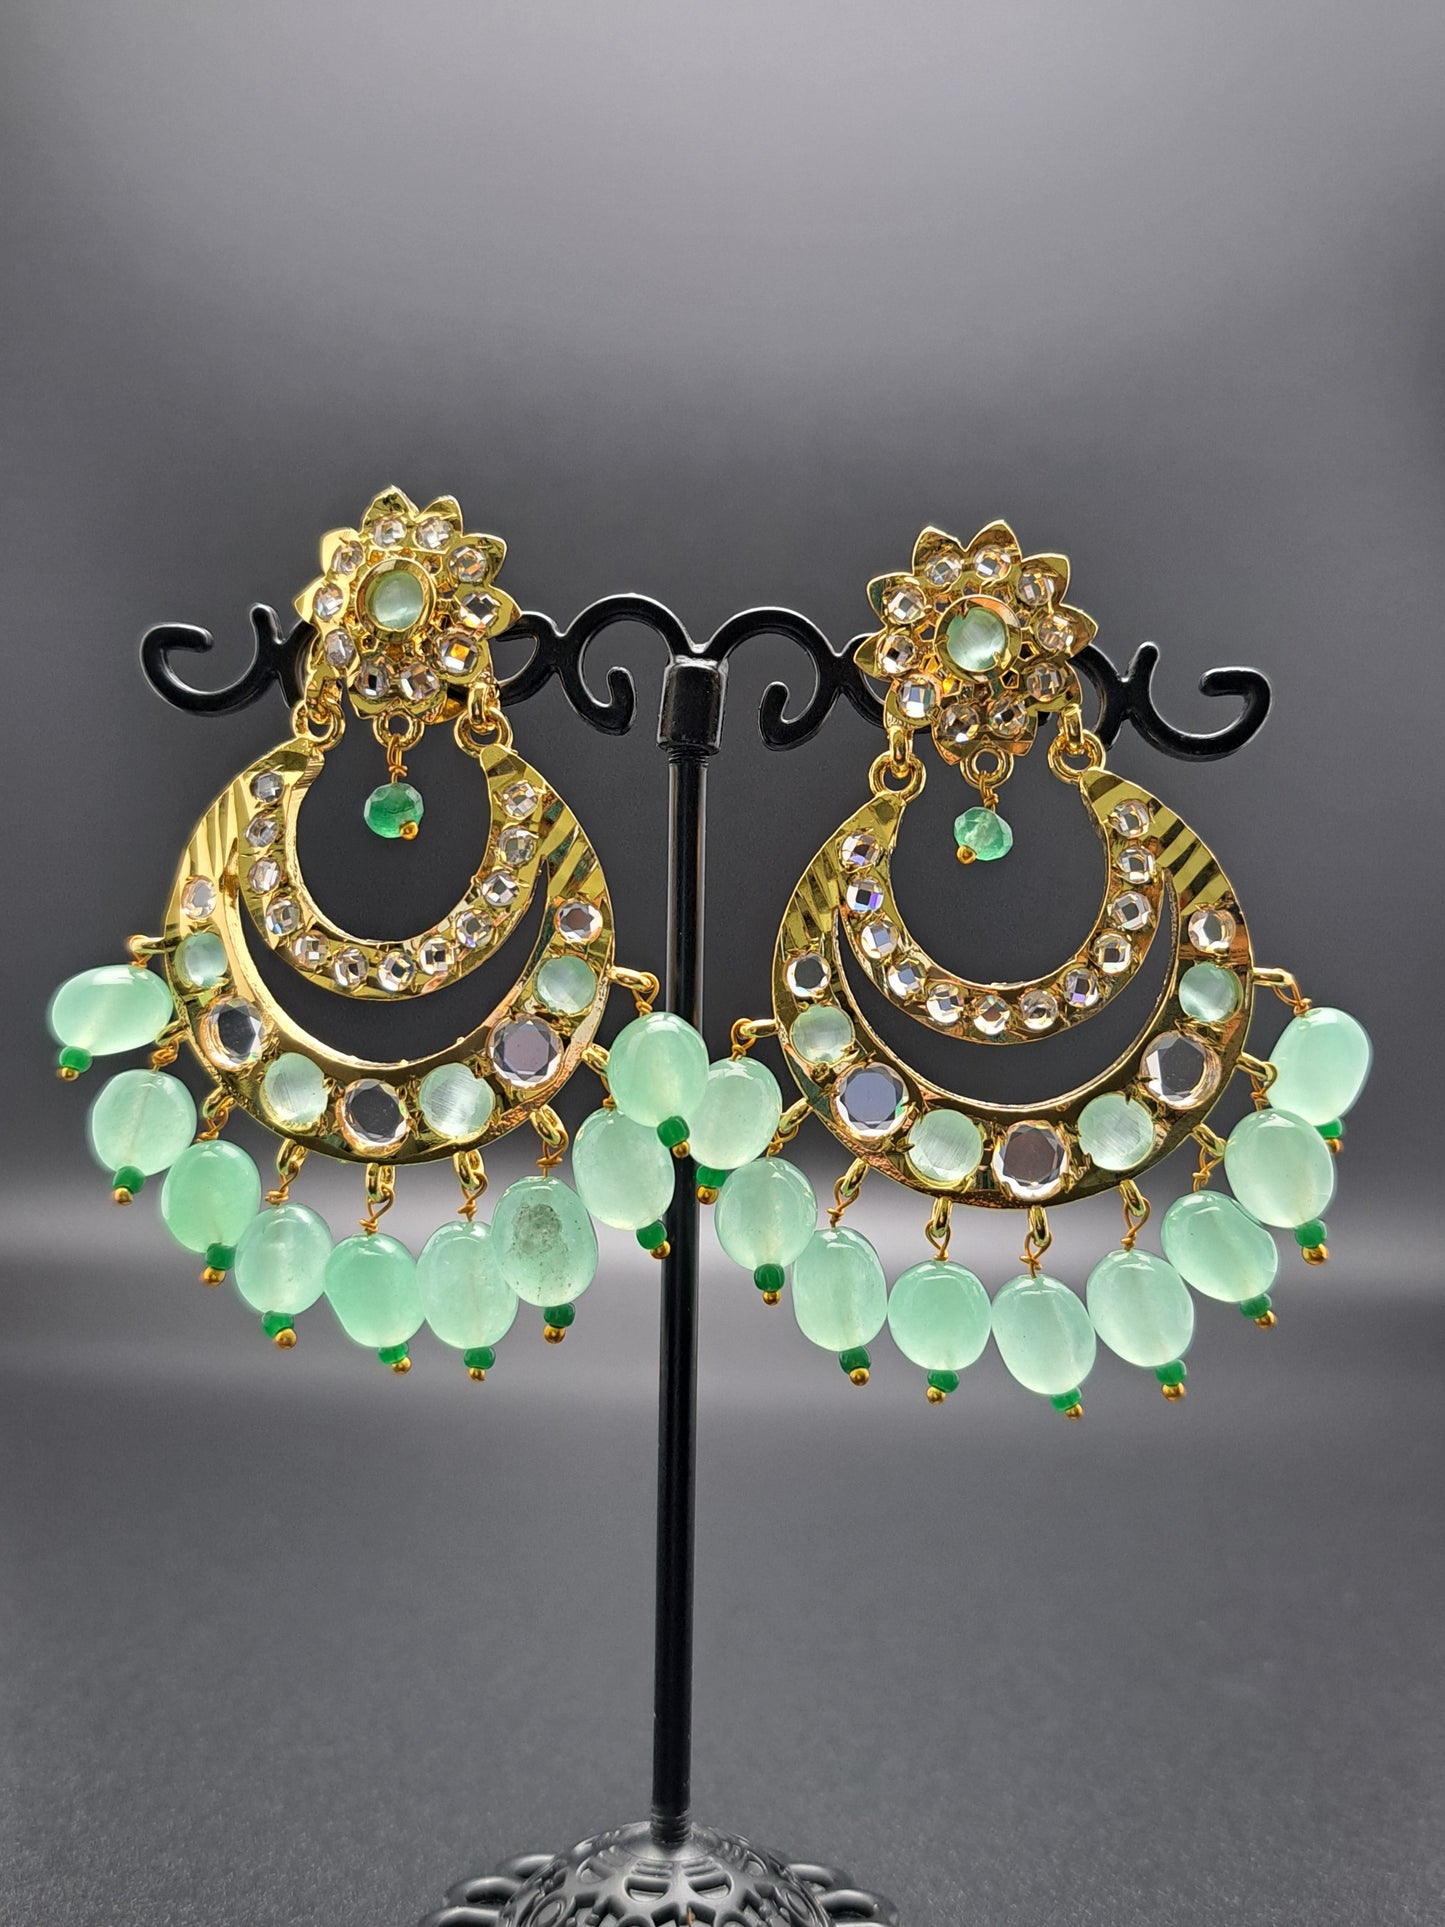 Hyderabadi double ring chand baali with polki, sea green color stones and awaze